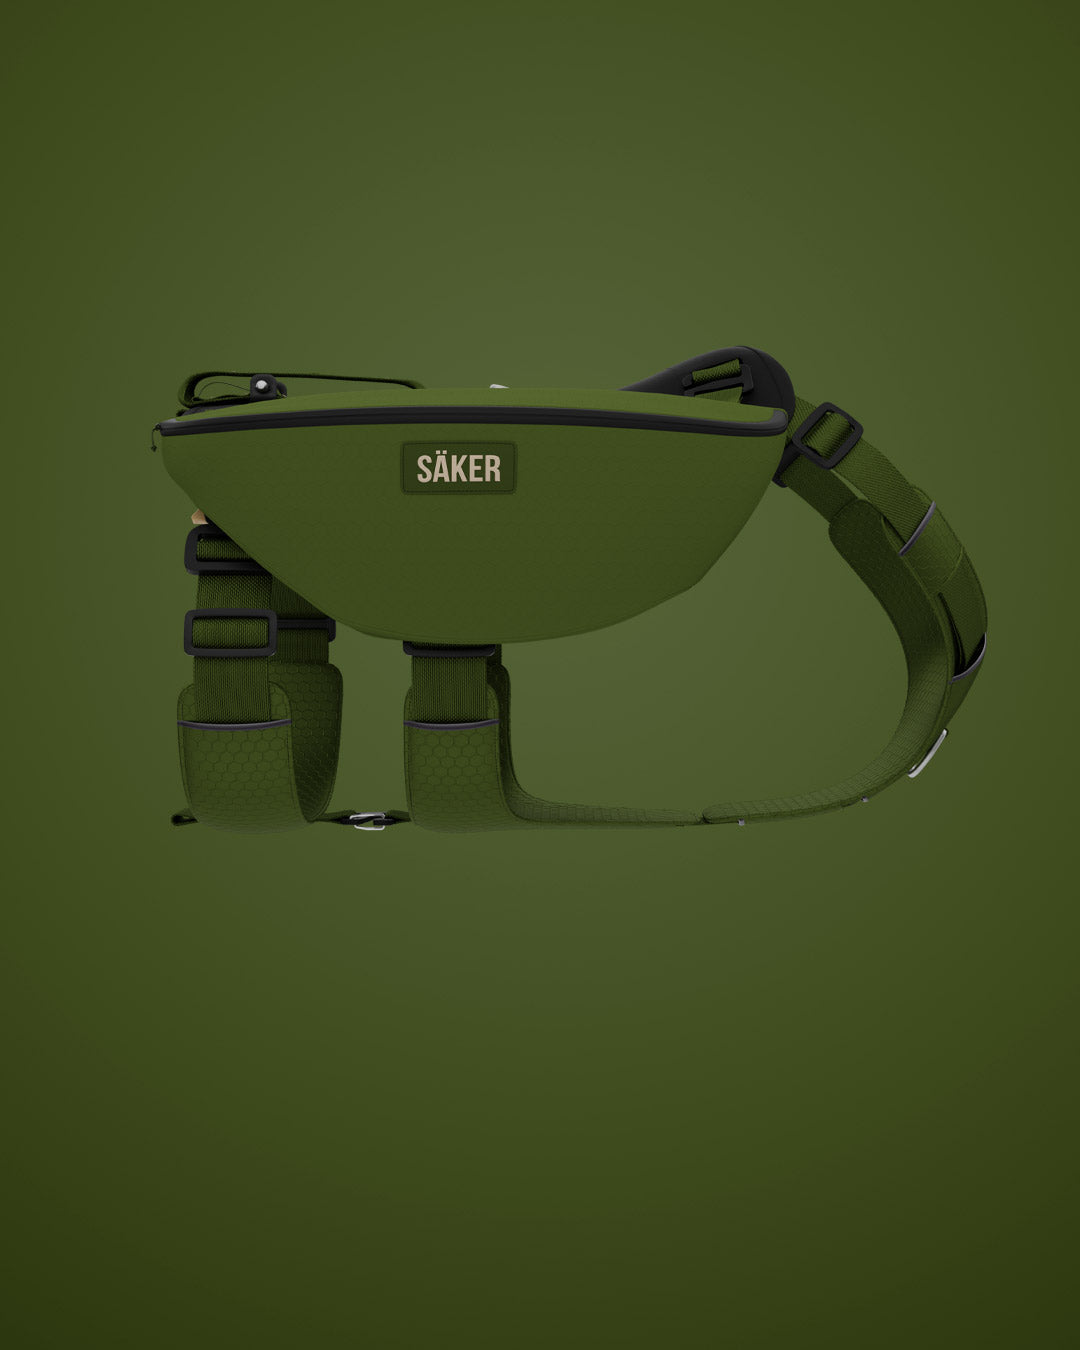 Sideview of the canyon pro pack in moss green on green background